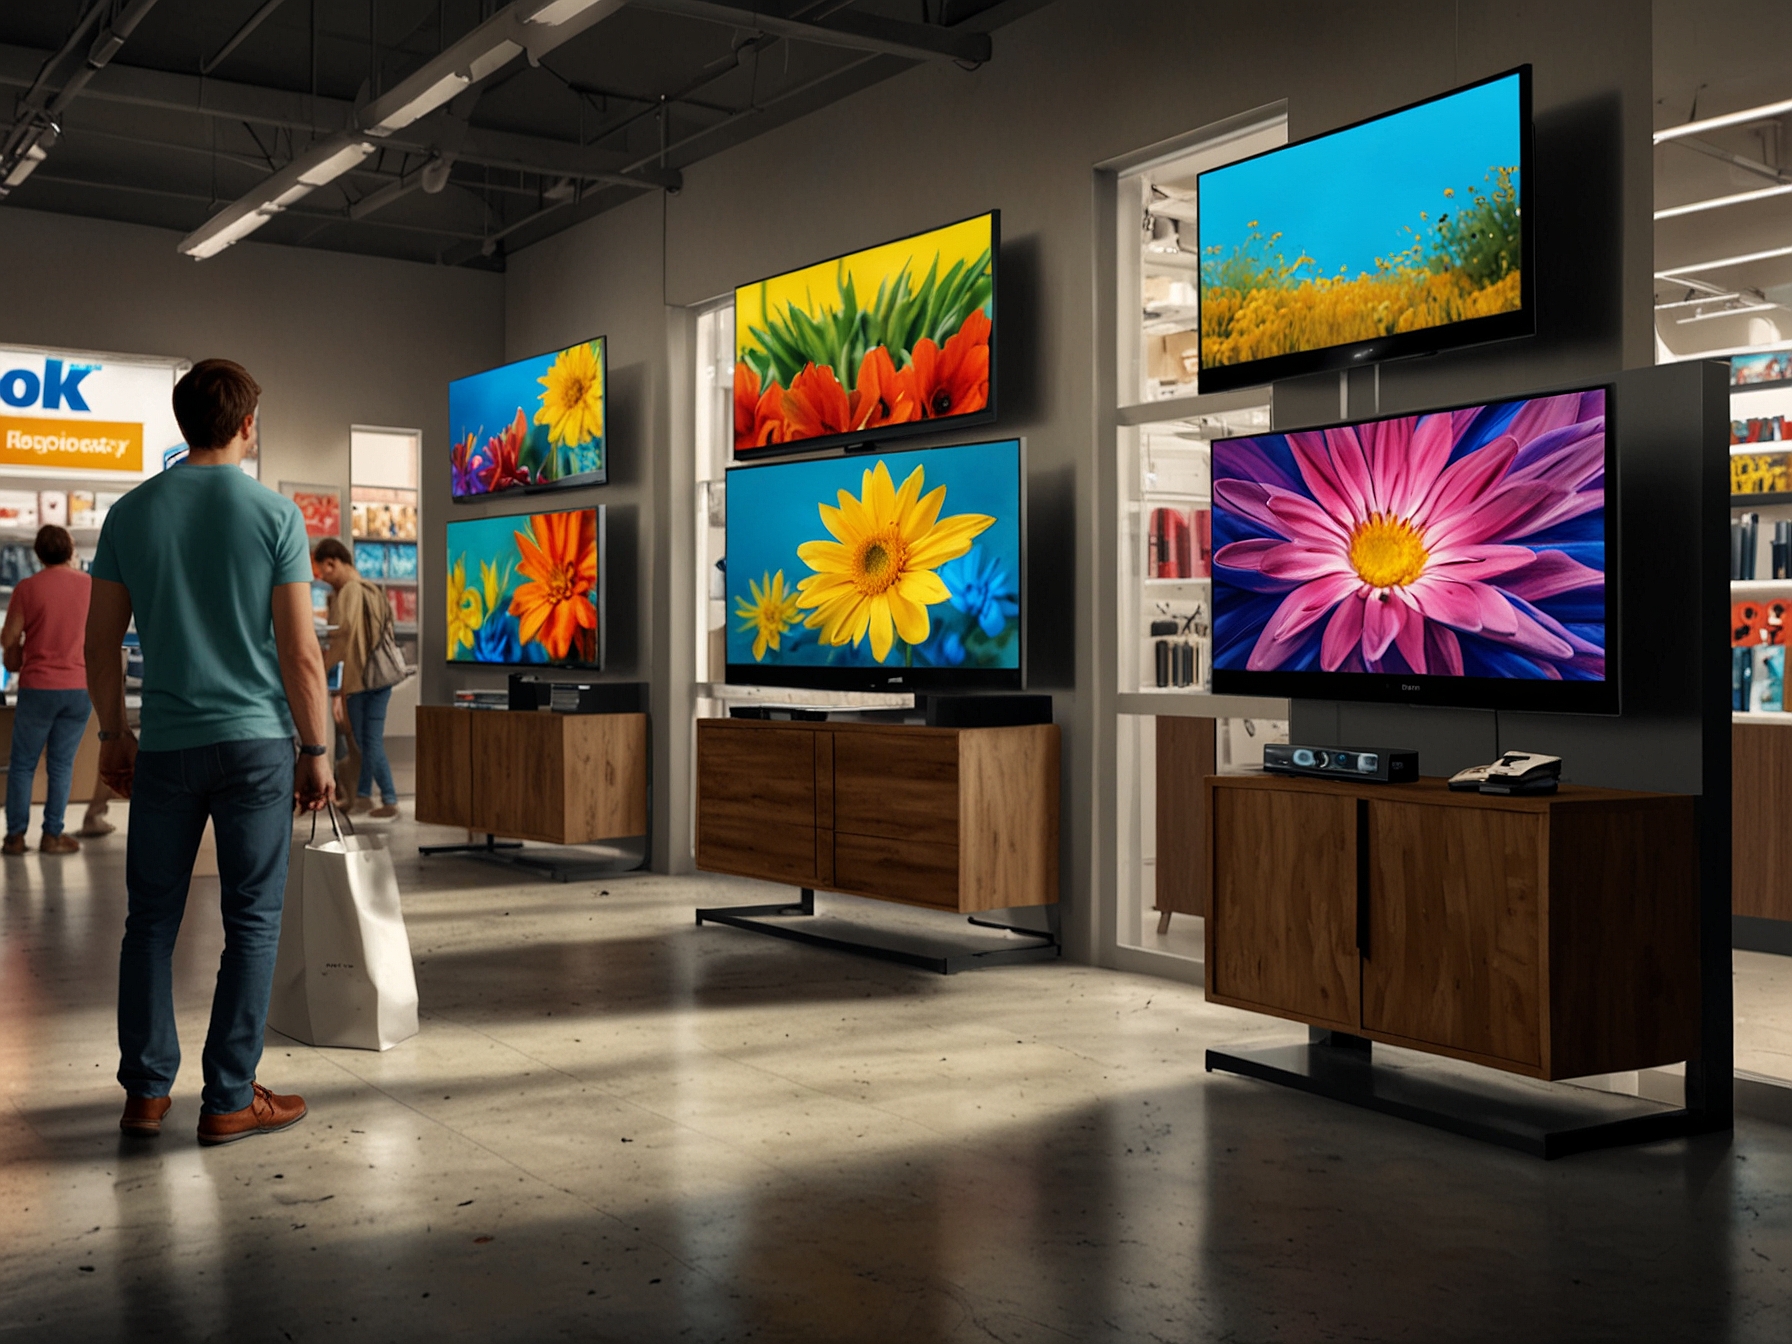 A vibrant retail display showcasing a variety of discounted 4K TVs at Walmart. Customers browse through the high-quality models from brands like Samsung, LG, and Sony, taking advantage of massive savings.